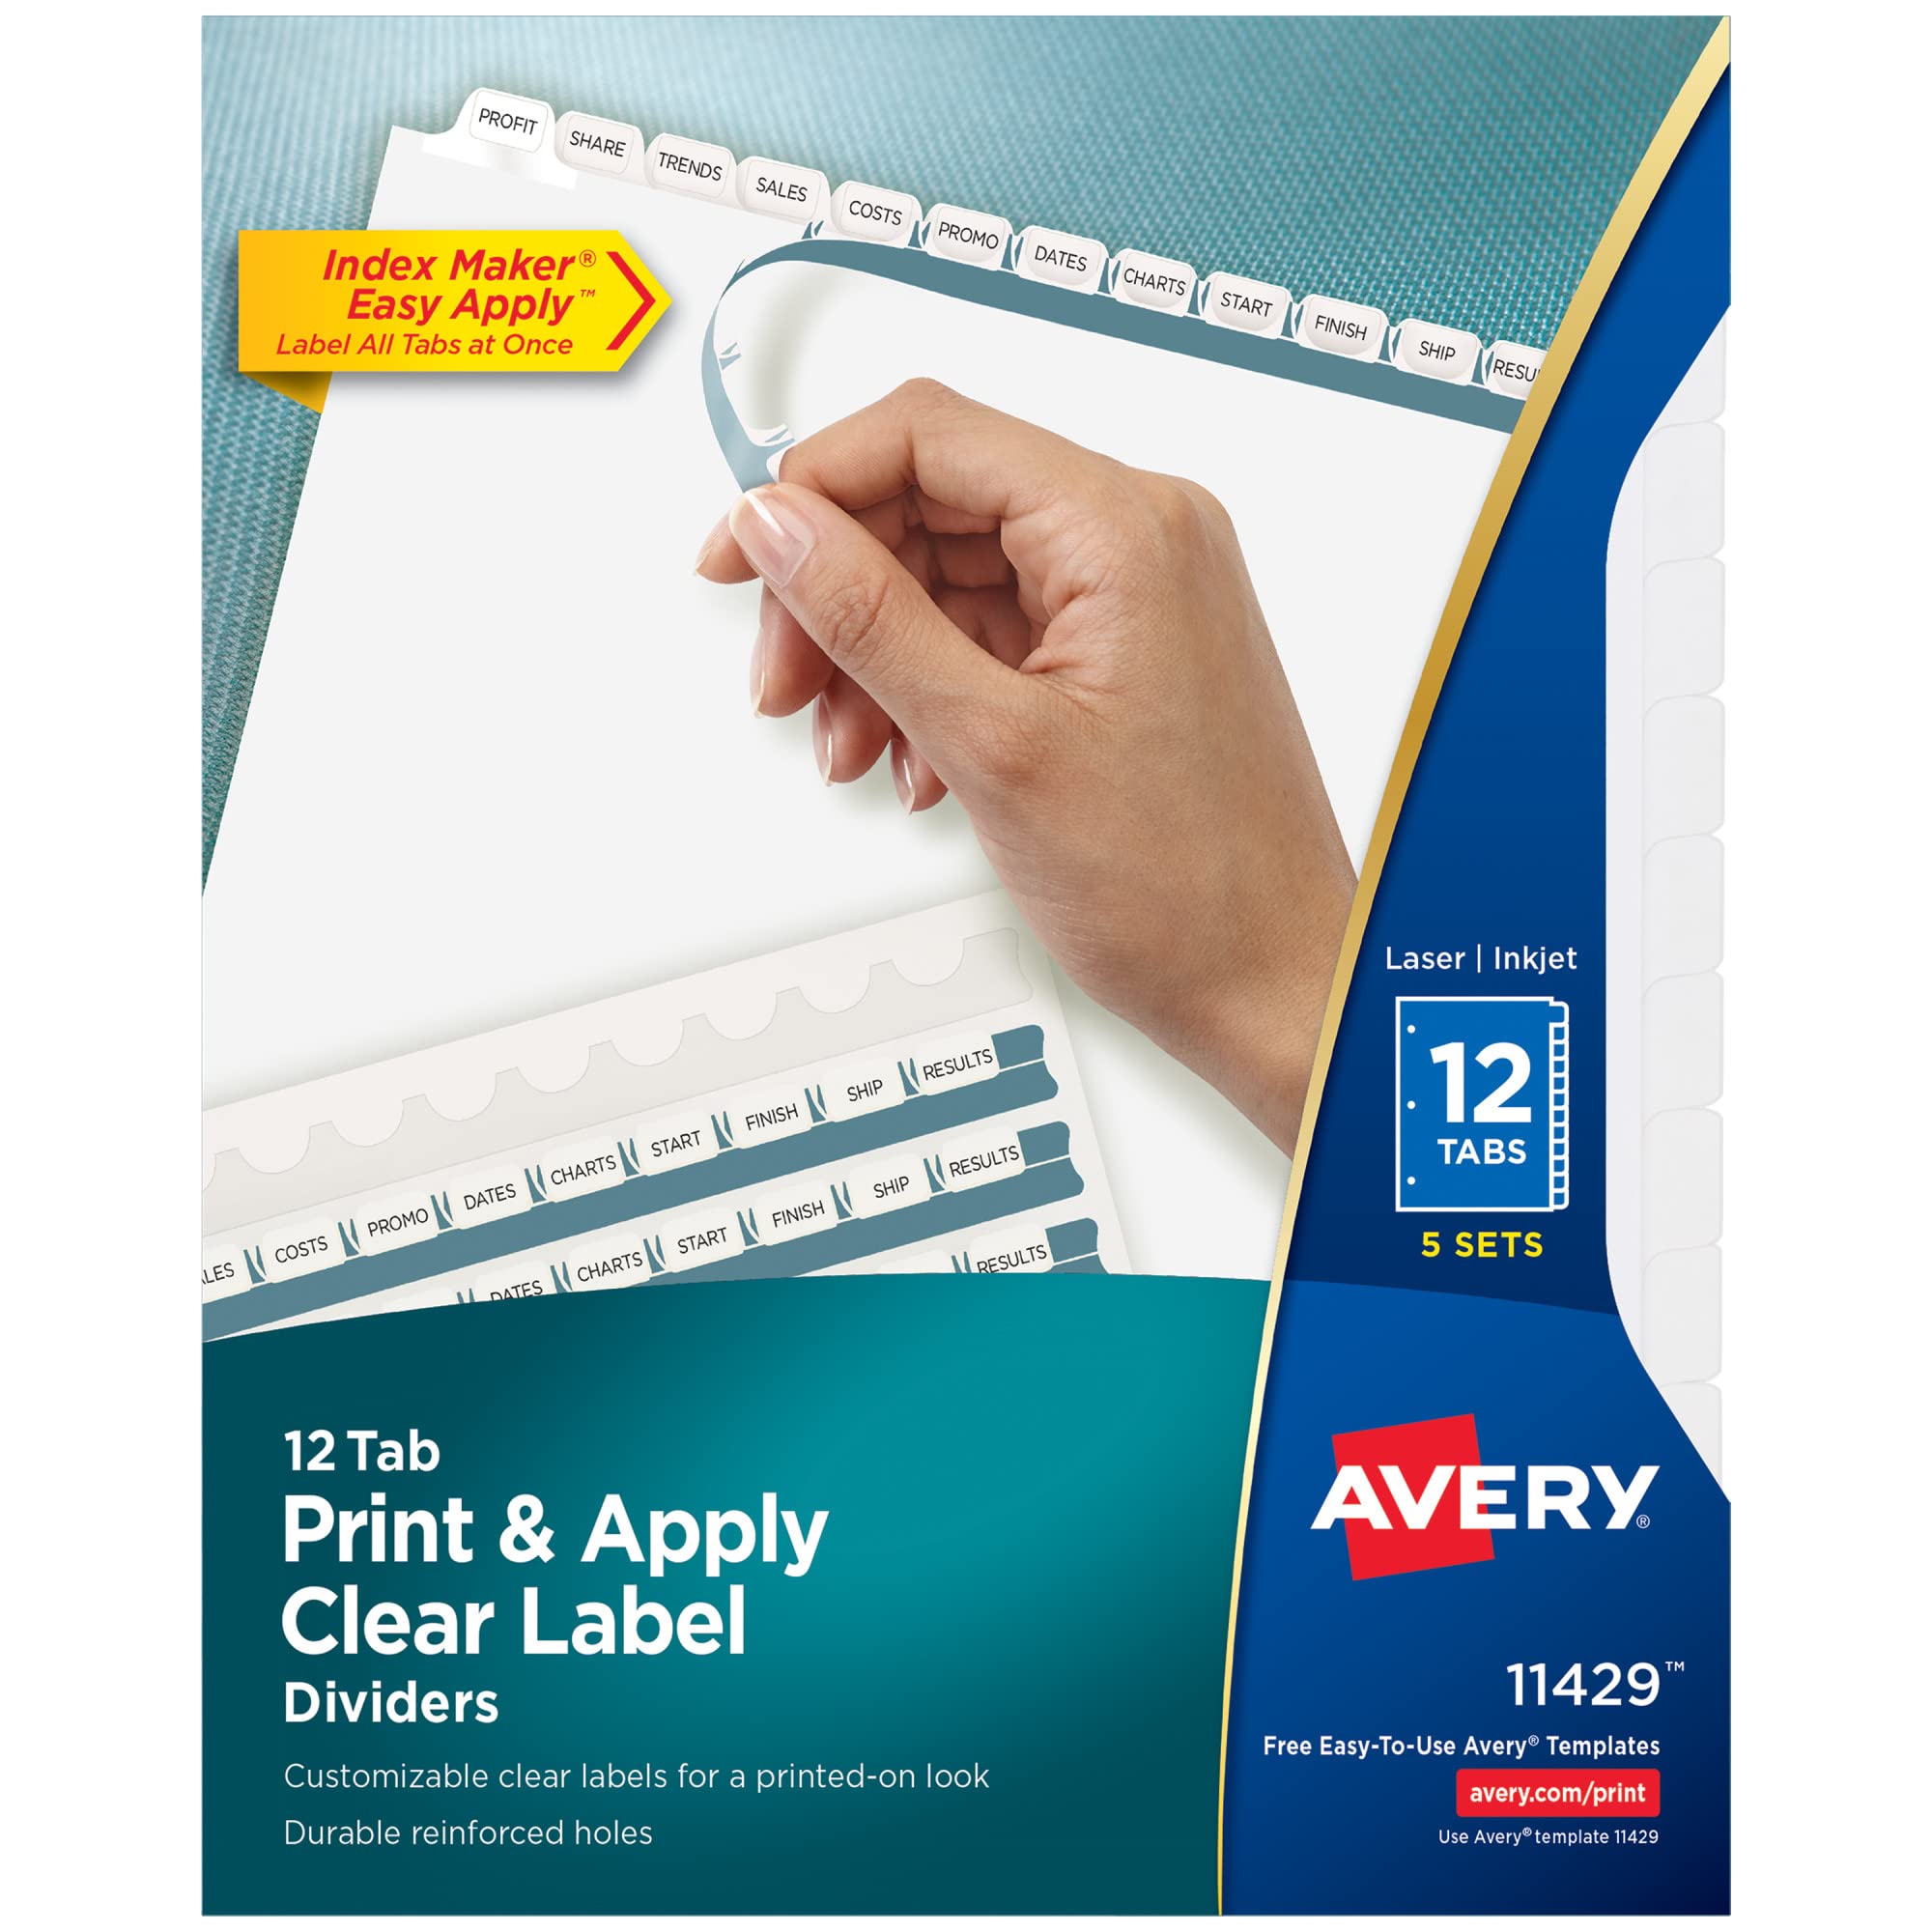 Avery 12 Tab Dividers for 3 Ring Binder, Easy Print &am...